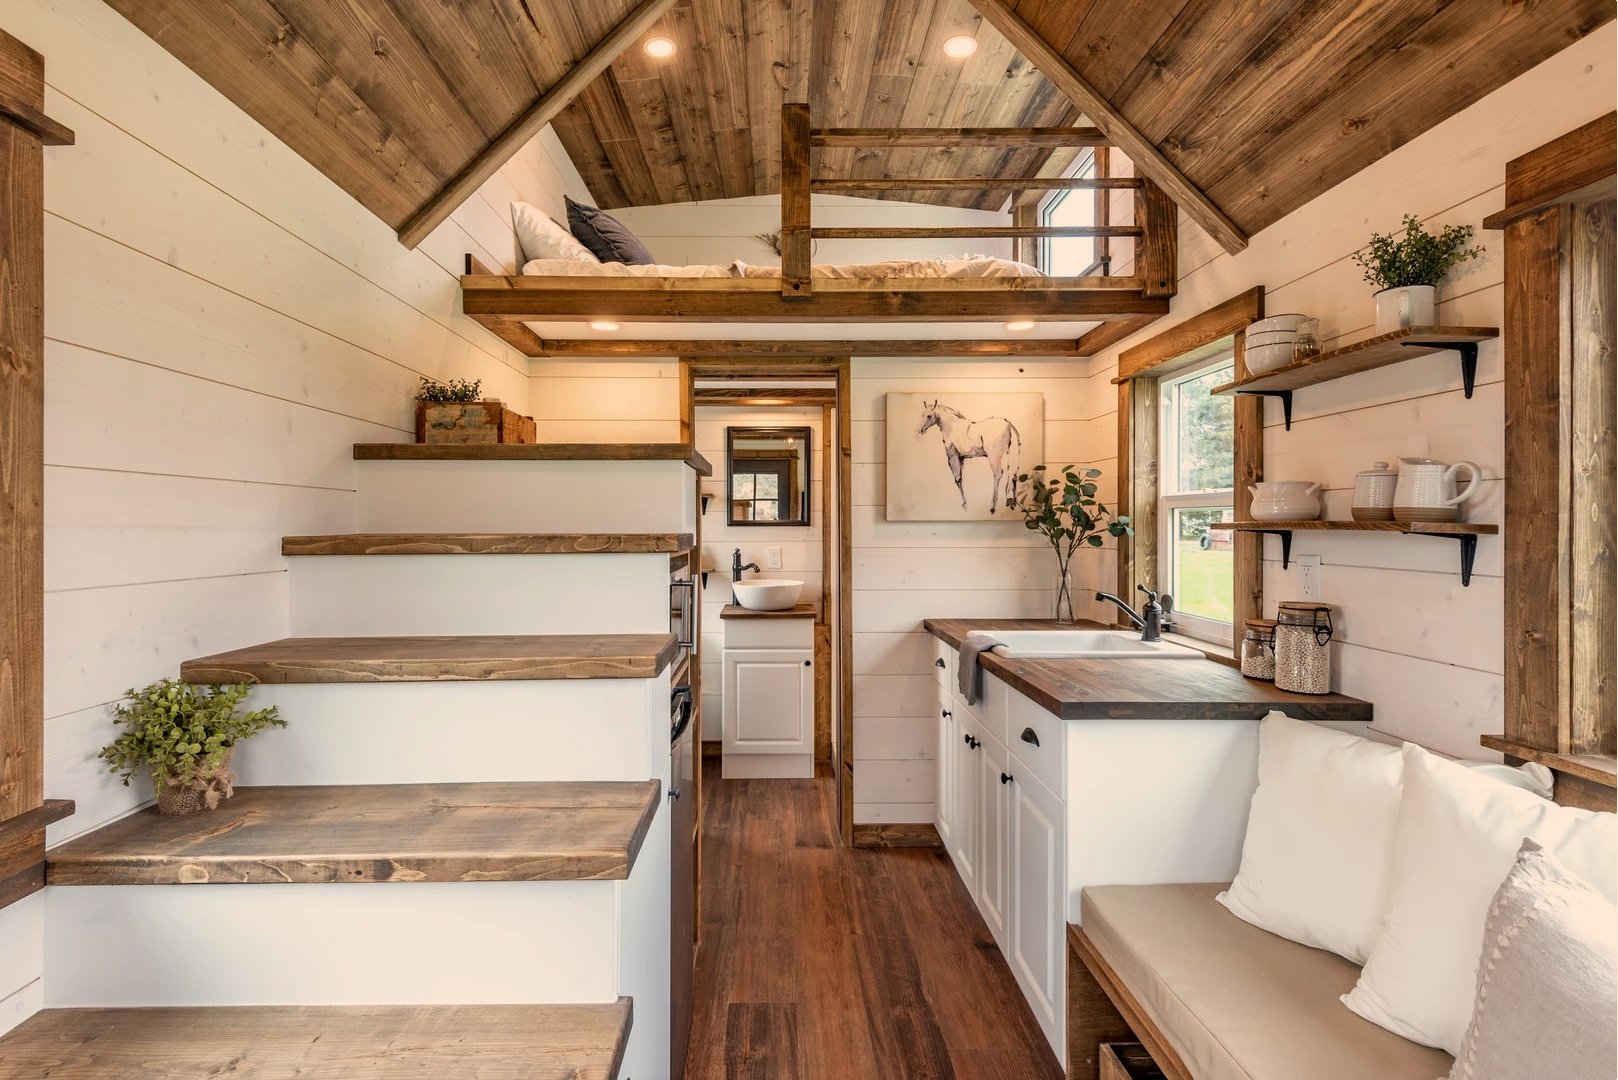 16' "Thistle" Tiny House on Wheels by Summit Tiny Homes